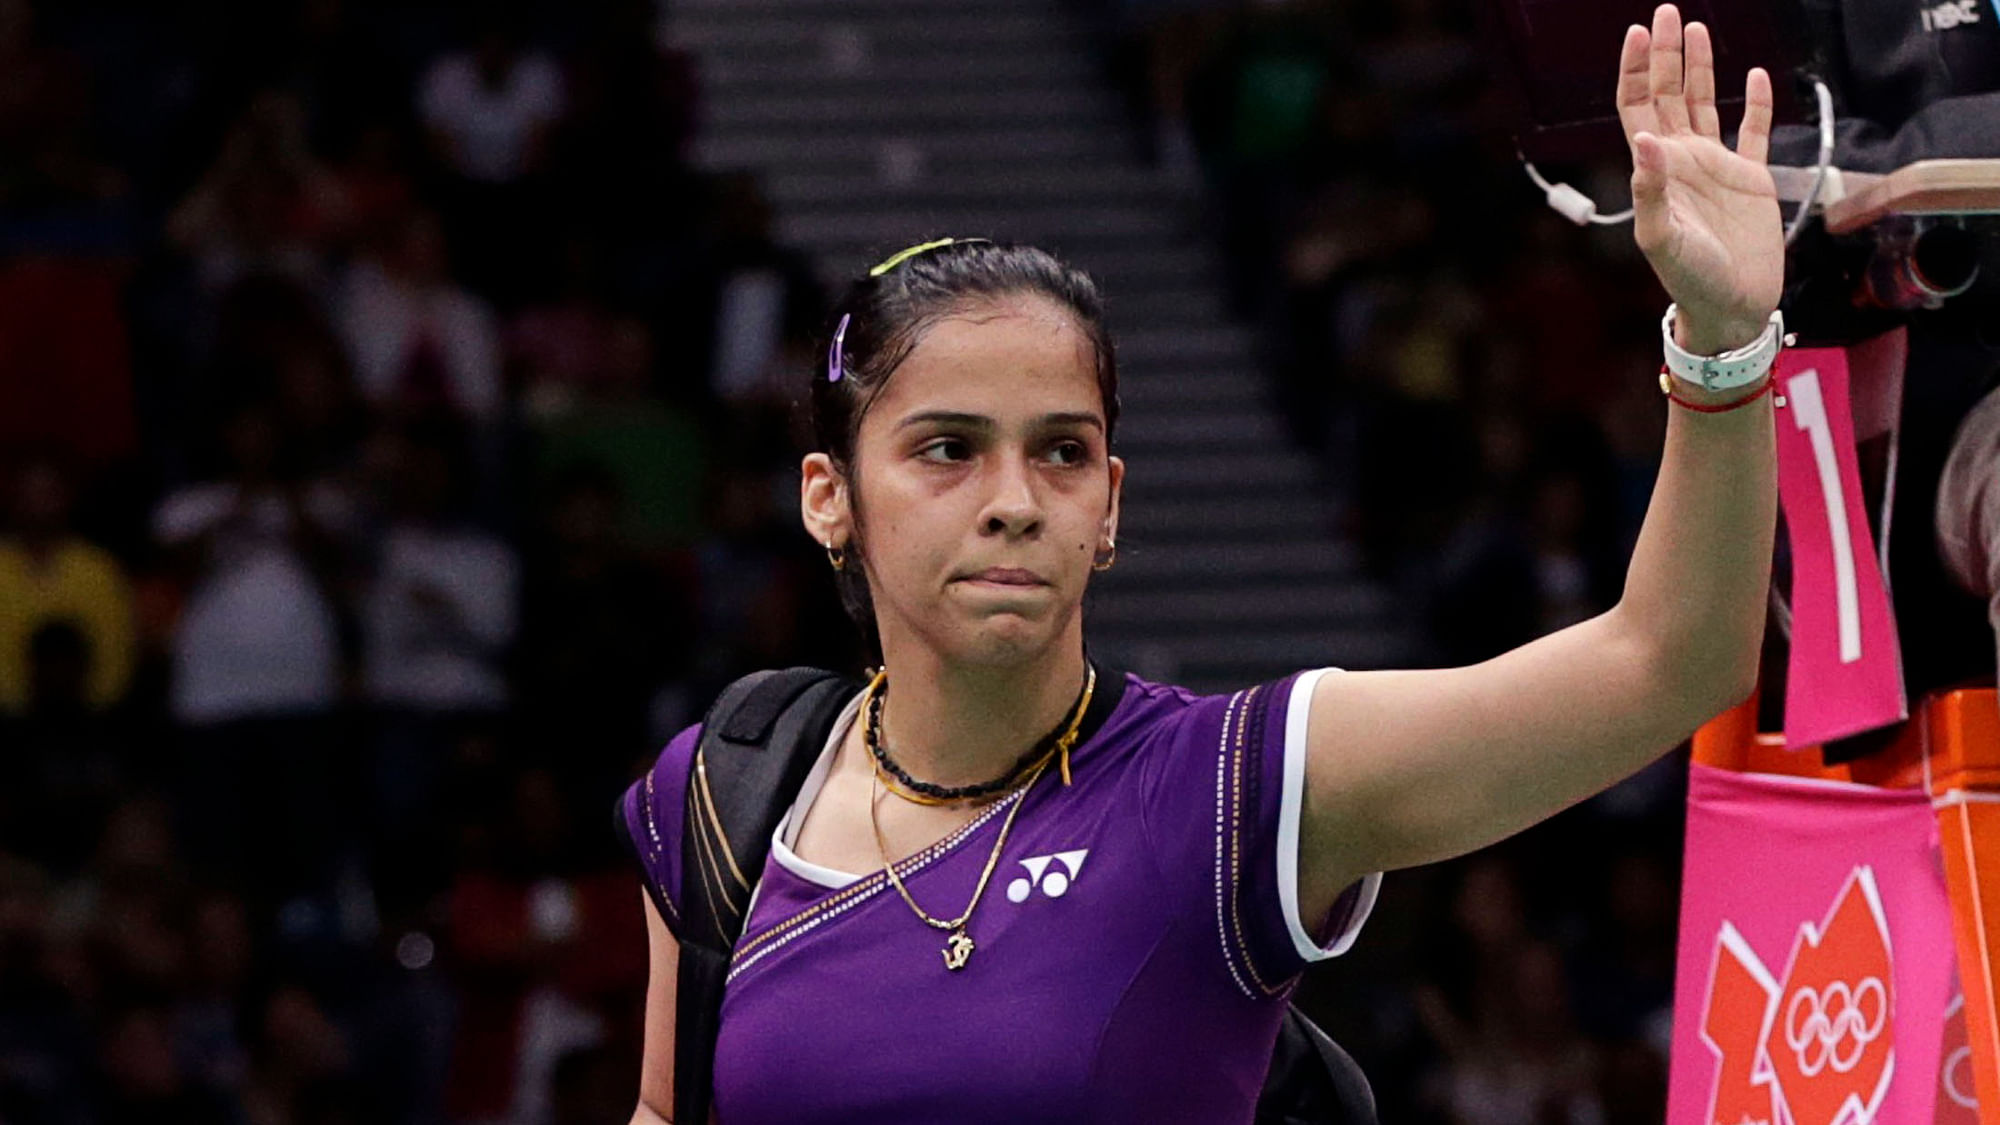 Indian shuttler Saina Nehwal crashed out in the second round of Thailand Open after being stunned by unseeded Sayaka Takahashi of Japan.